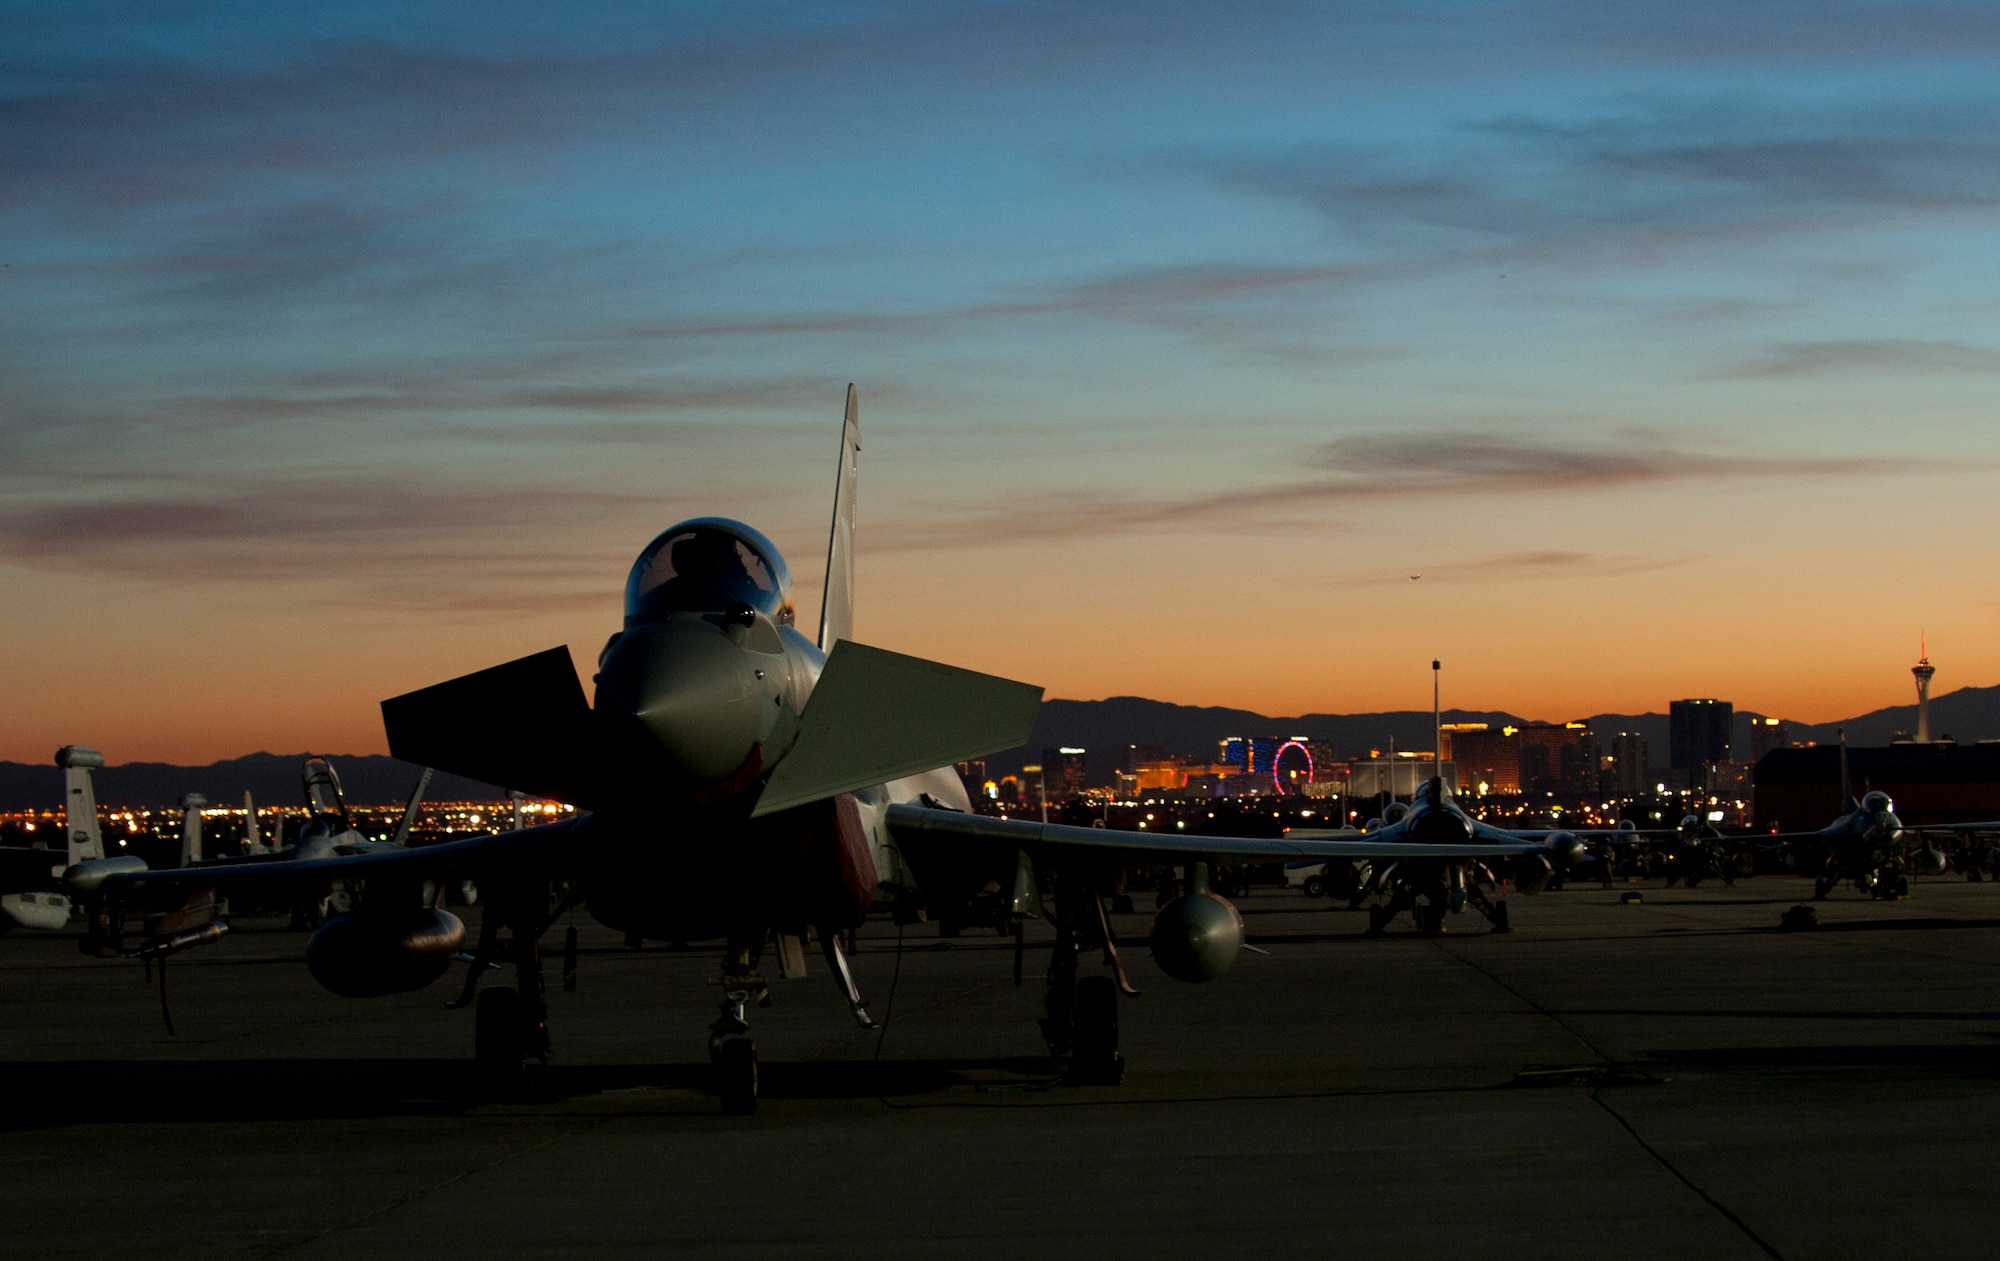 A Royal Air Force Typhoon FGR4 fighter assigned to 1 (Fighter) Squadron, RAF Lossiemouth, Scotland, stands ready on the flightline prior to playing part in a Red Flag 15-1 night training sortie at Nellis Air Force Base, Nev., Feb. 4, 2015. The RAF has participated in Red Flag exercises since the late 1970’s. (U.S. Air Force photo by Airman 1st Class Joshua Kleinholz)